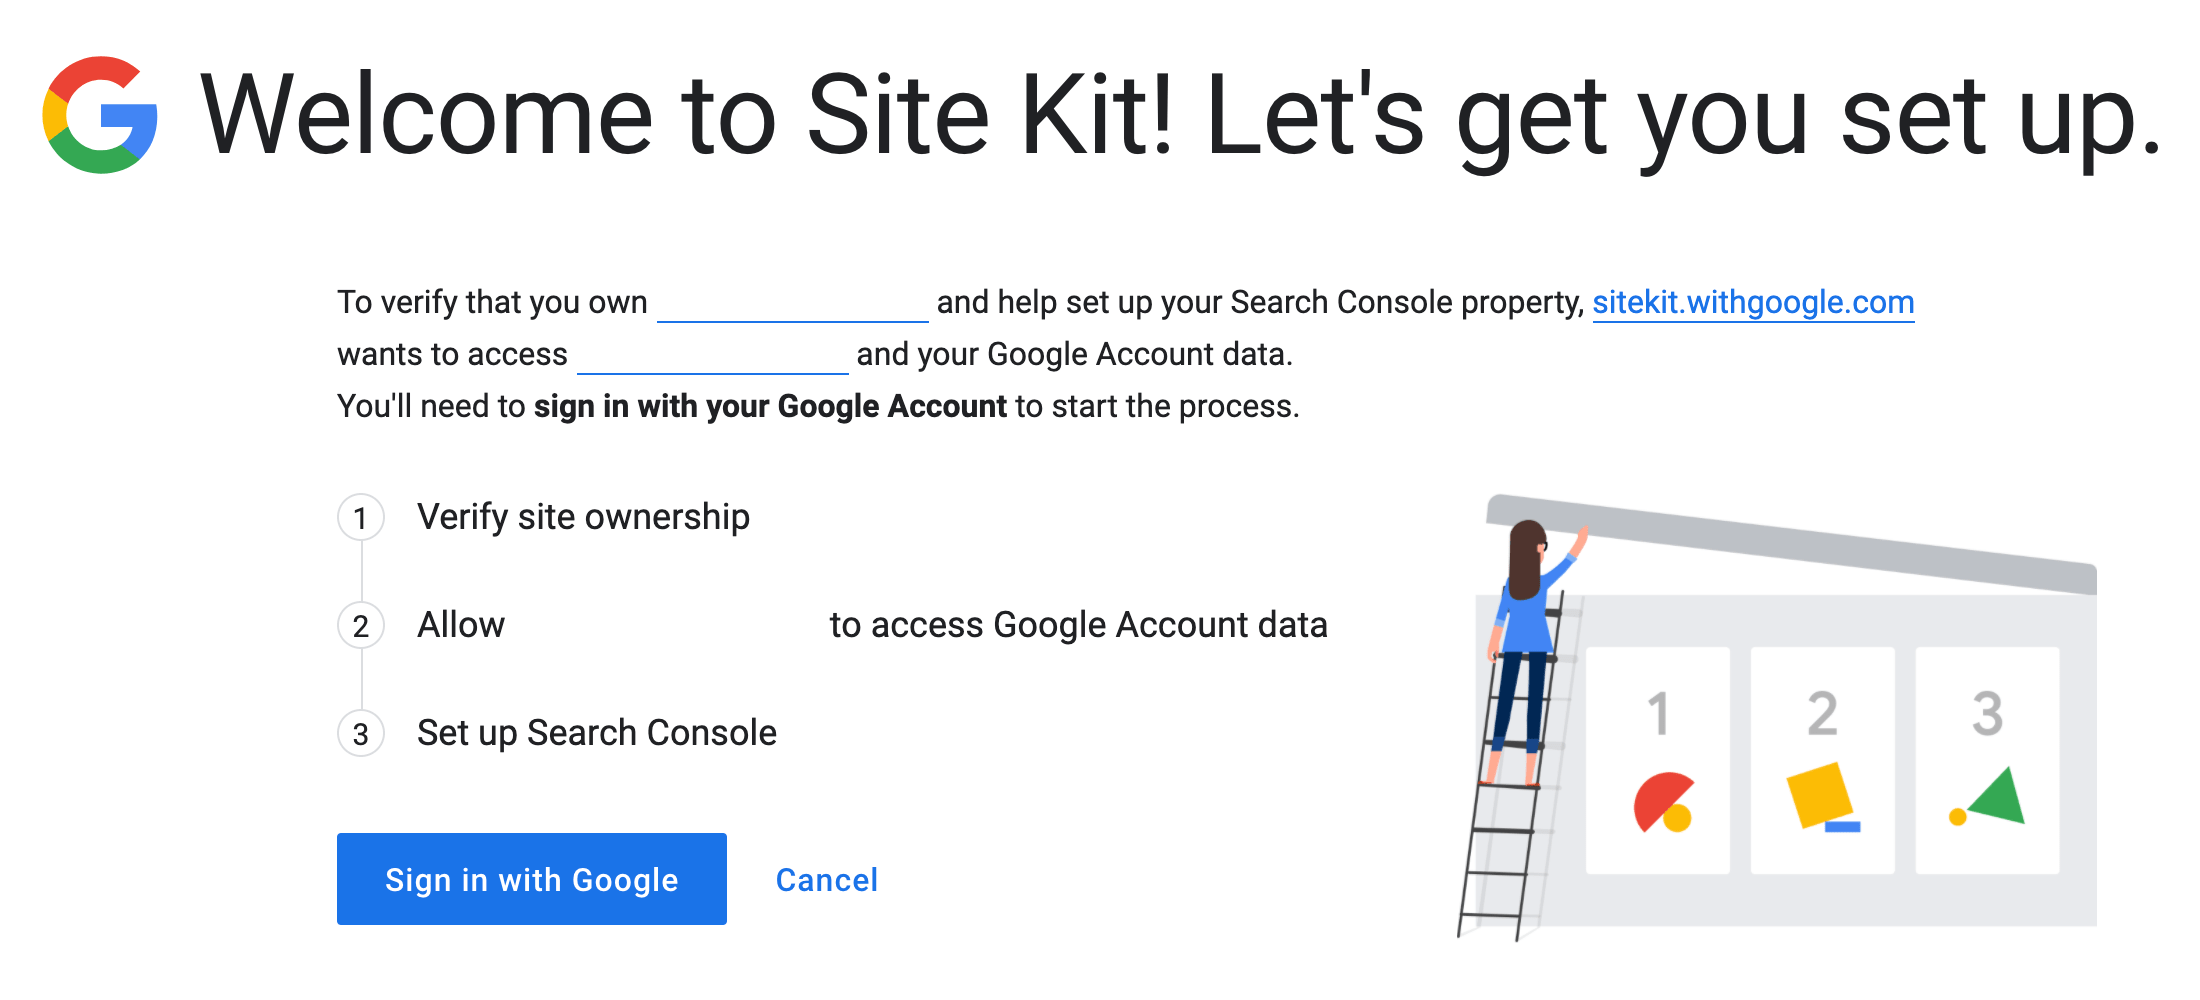 Welcome to Site Kit